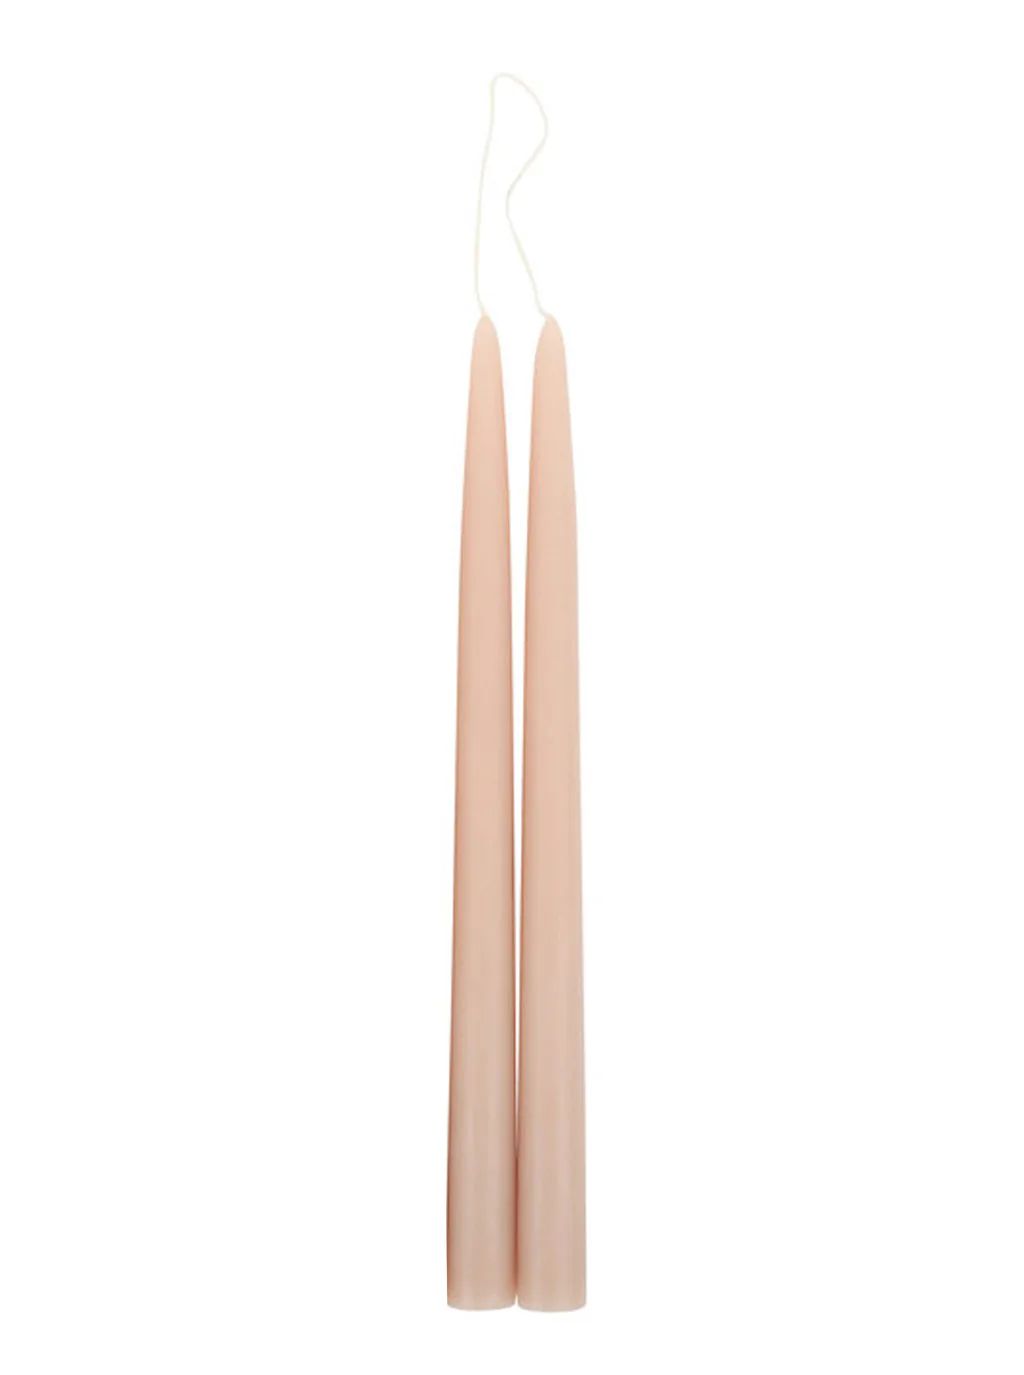 Petal Taper Candles, Set of 2 | House of Jade Home